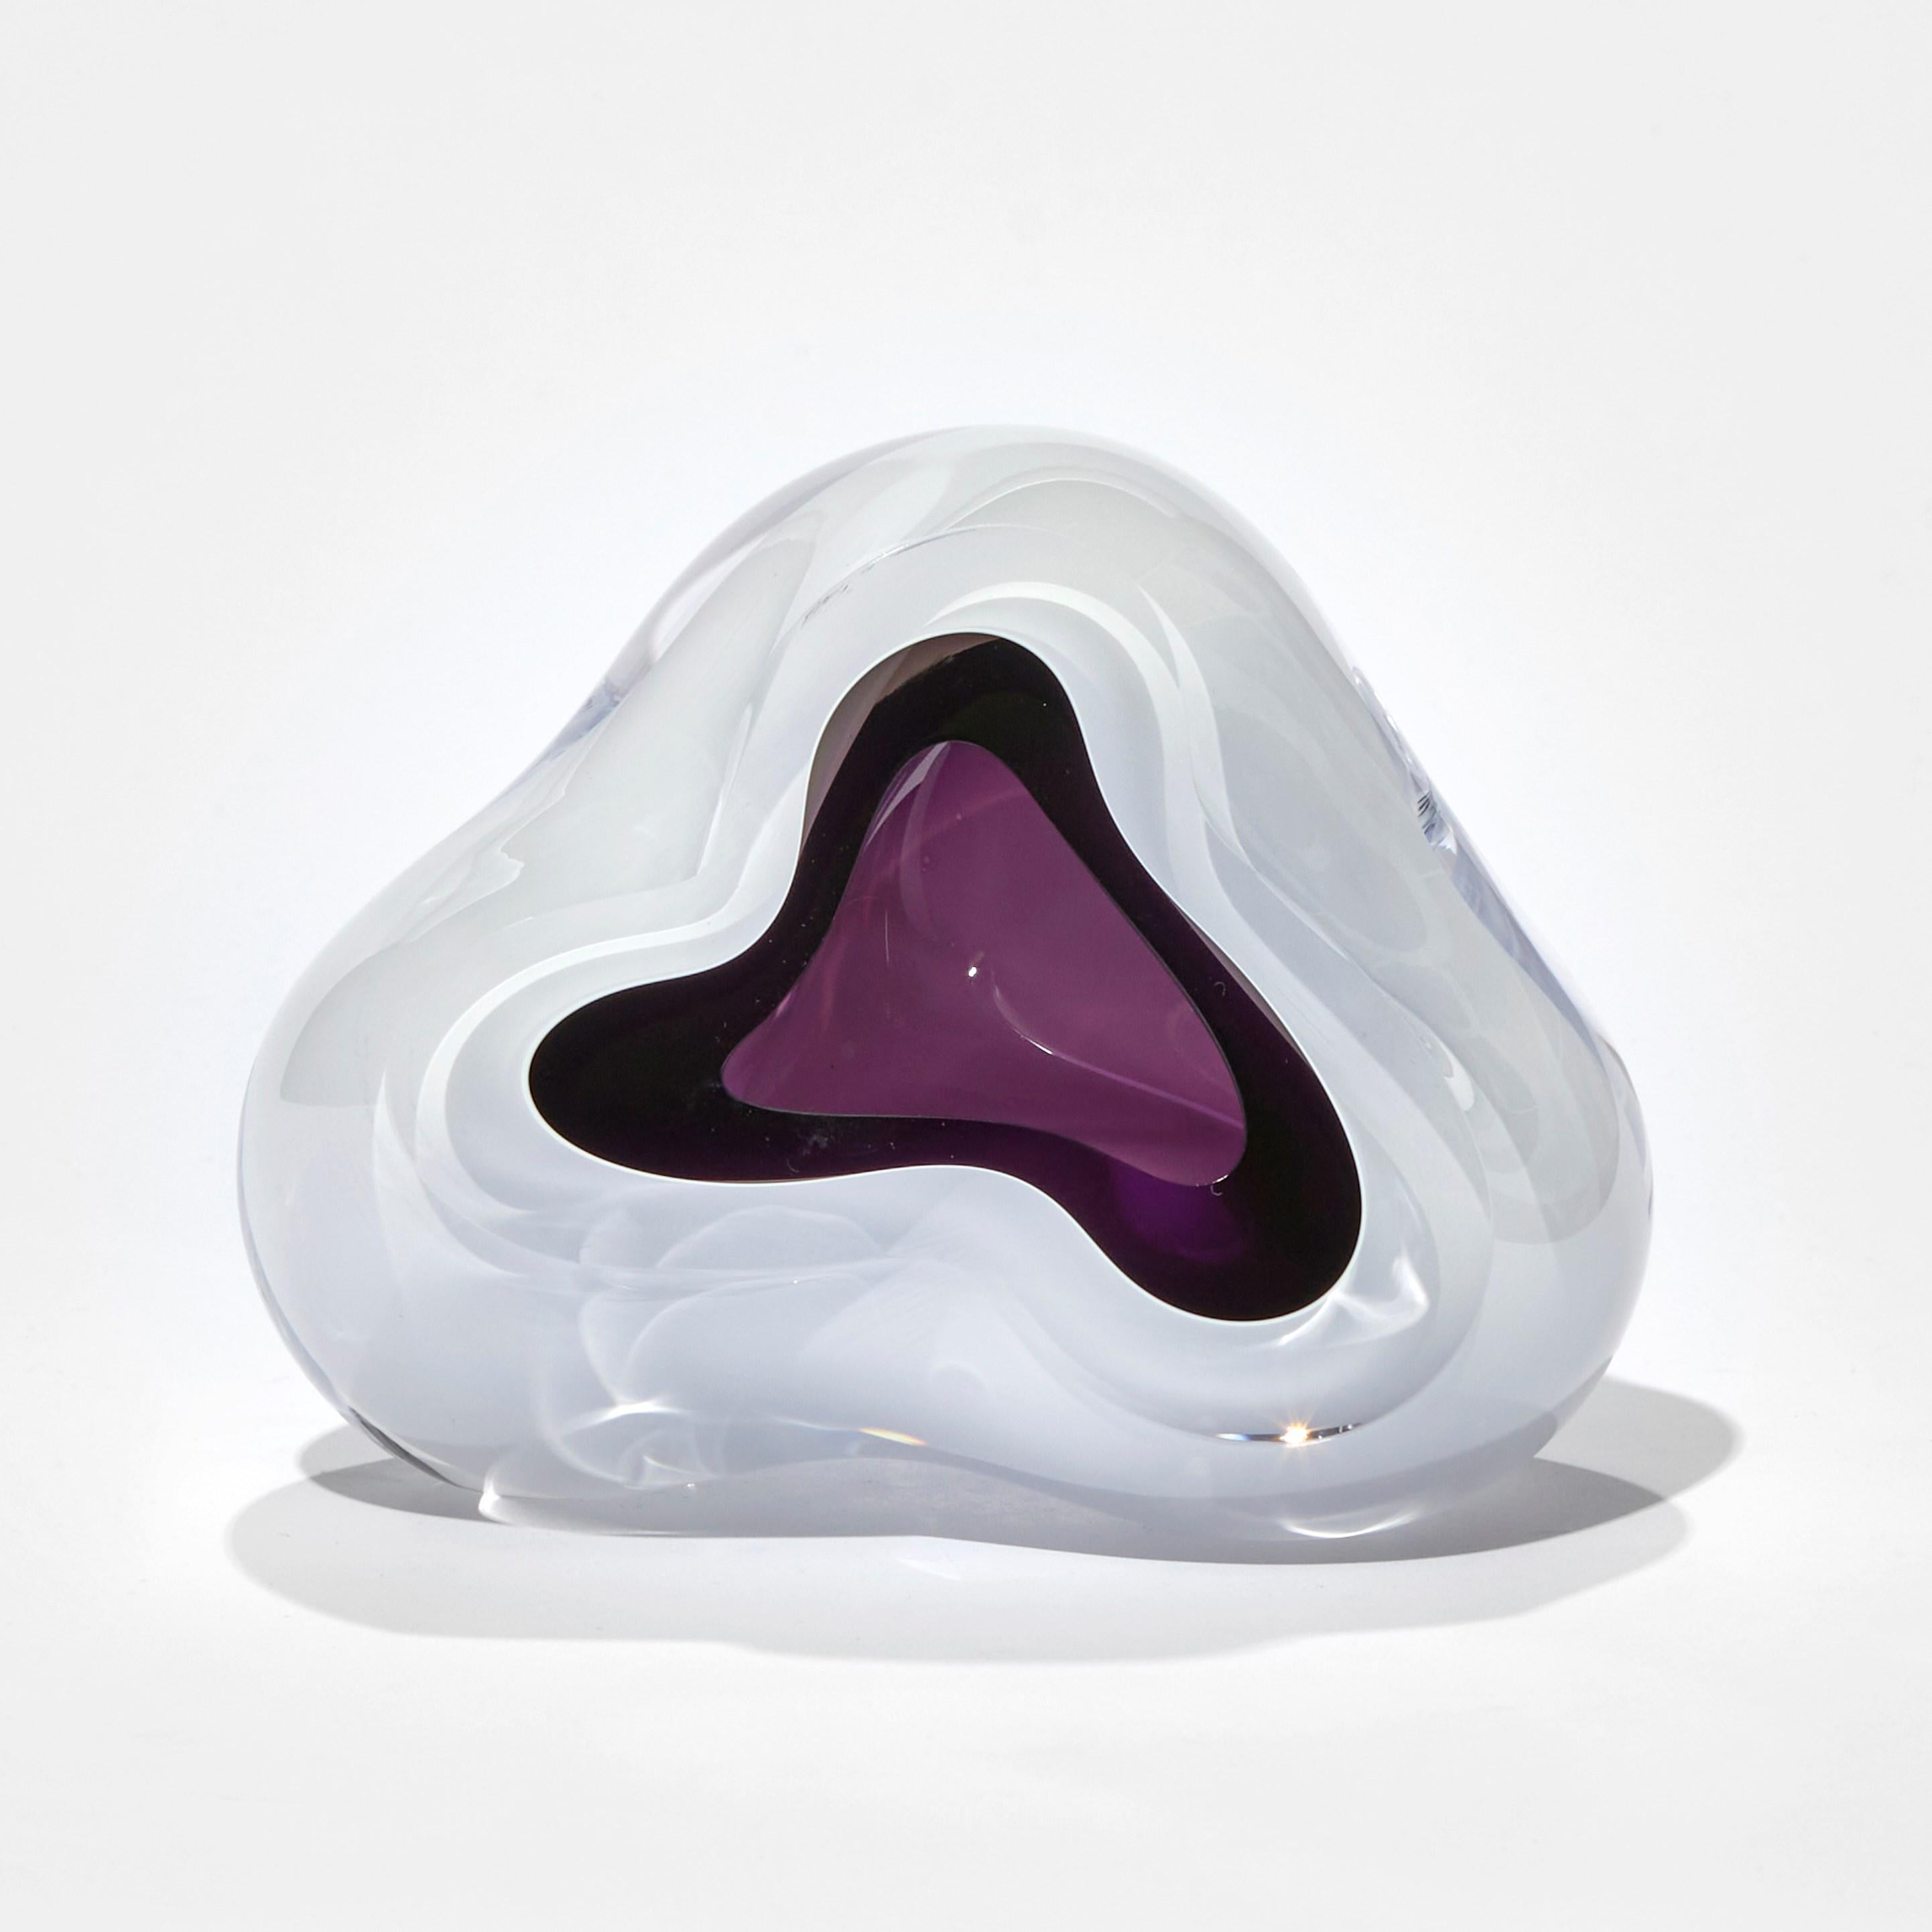 Ice Vug in Purple is a unique handblown sculpture by the British artist Samantha Donaldson. A charming ethereal sculpture with a glacier white exterior and rich purple cavernous interior. Taking inspiration from rock formations, geodes and the